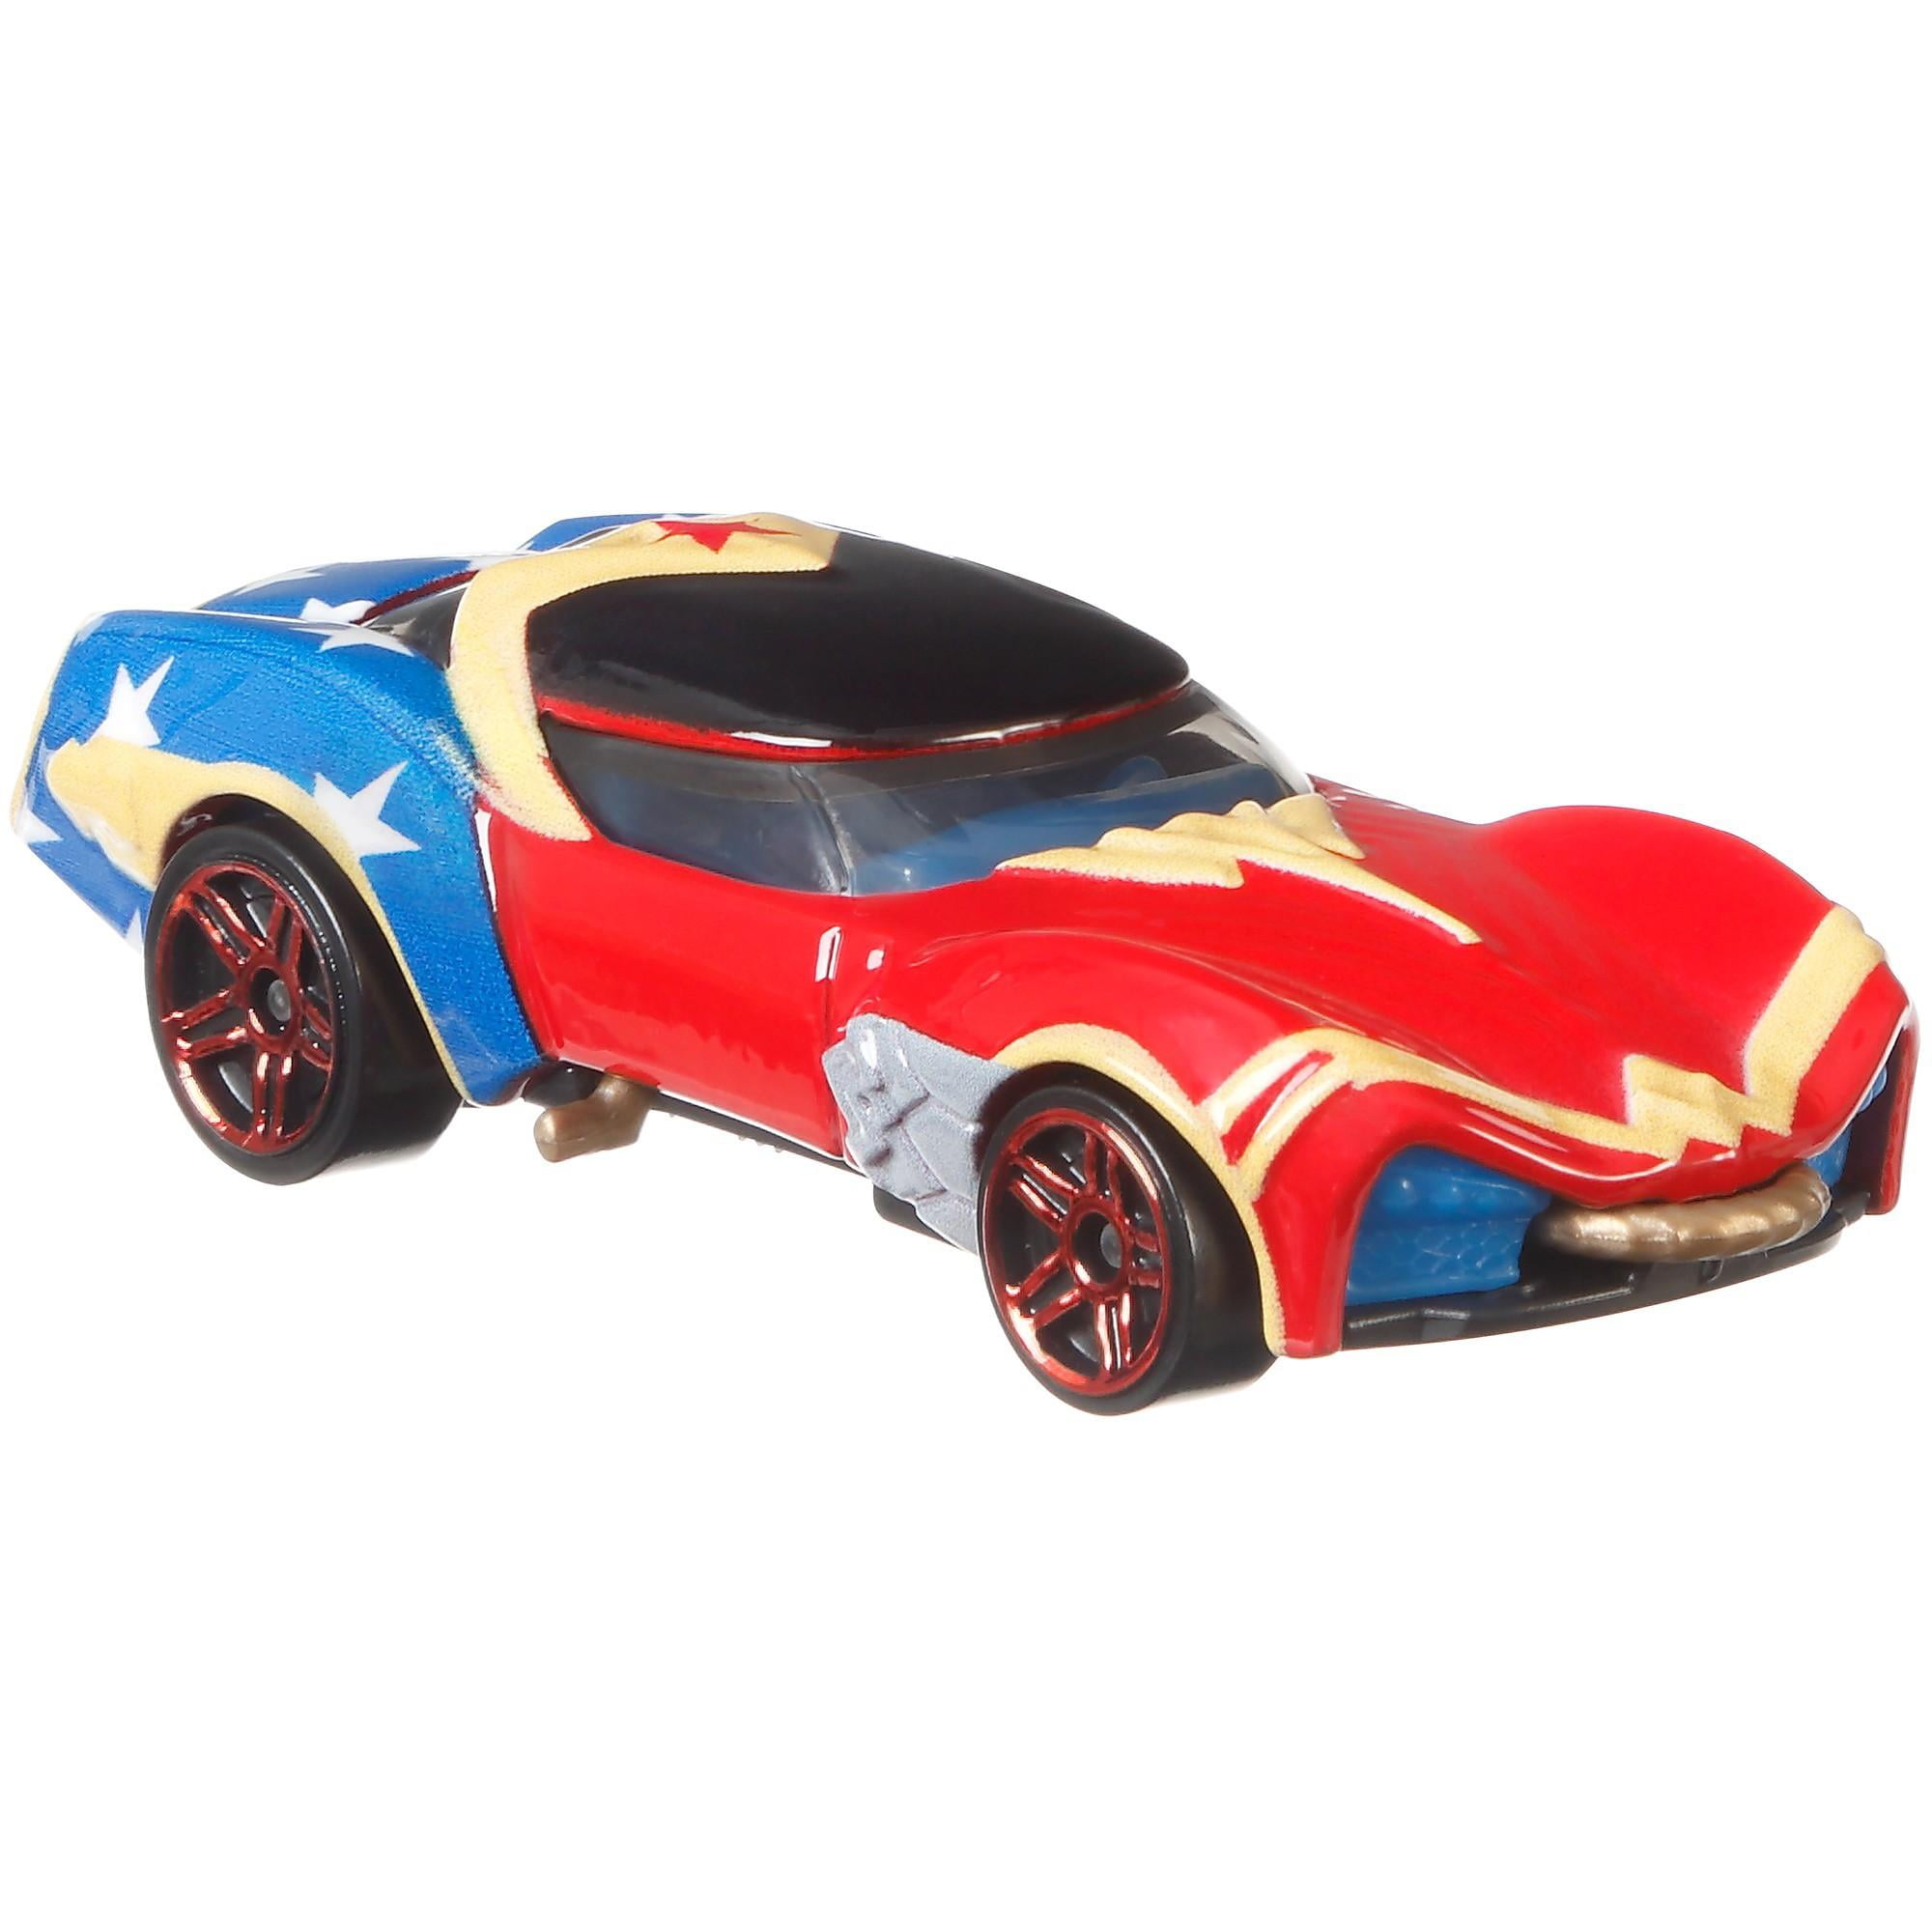 DC Wonder Woman Justice League Hot Wheels Character Cars New Free Shipping